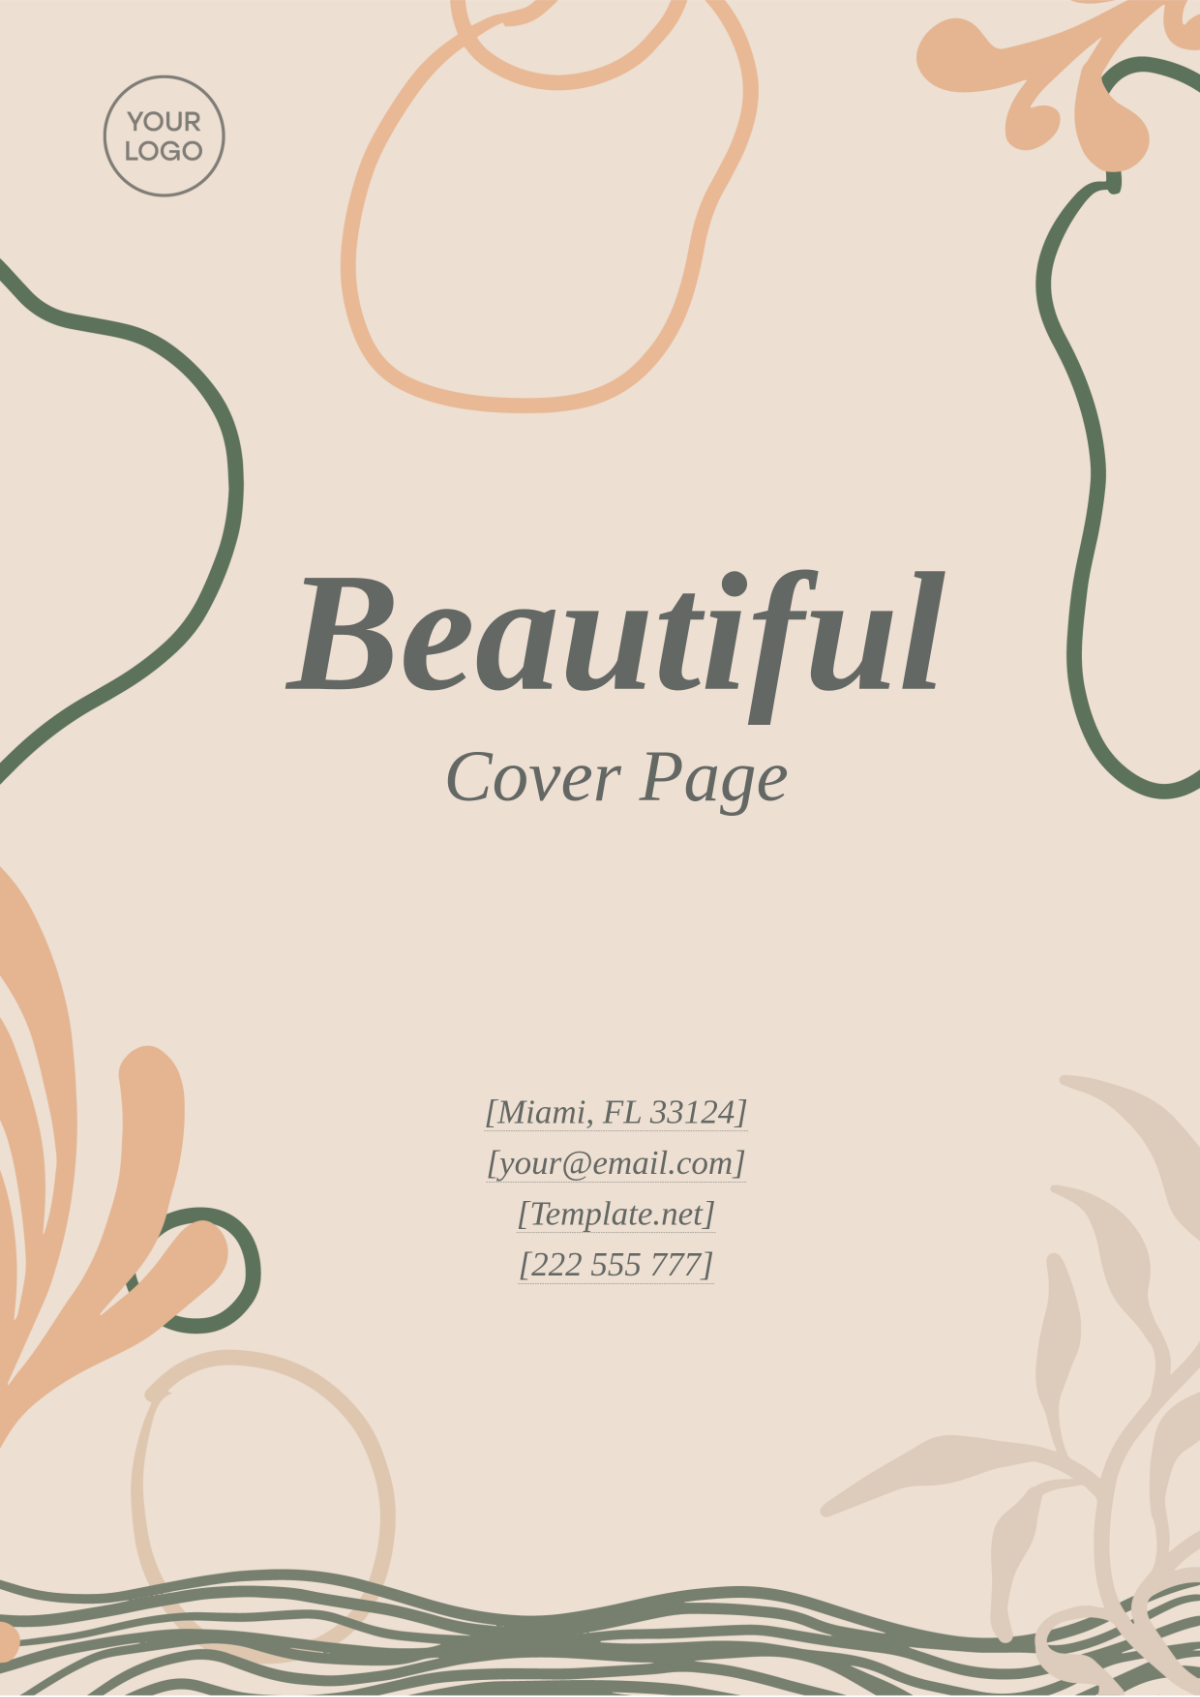 Beautiful Cover Page Image Template